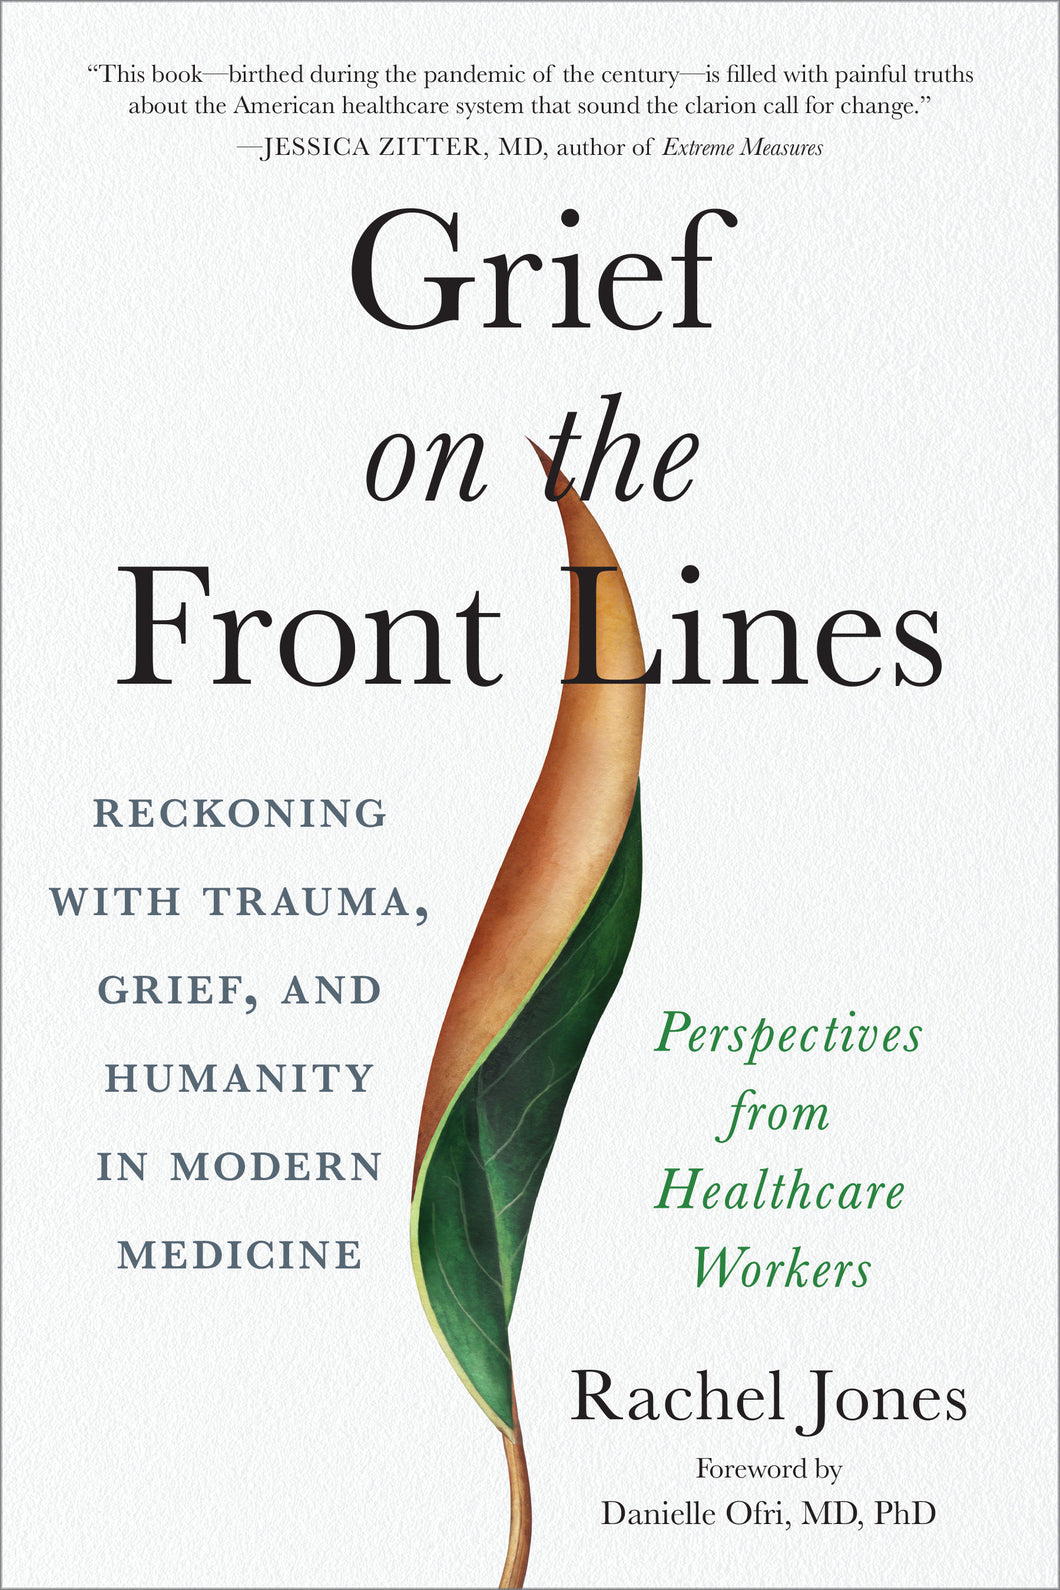 Grief on the Front Lines: Reckoning with Trauma, Grief, and Humanity in Modern Medicine